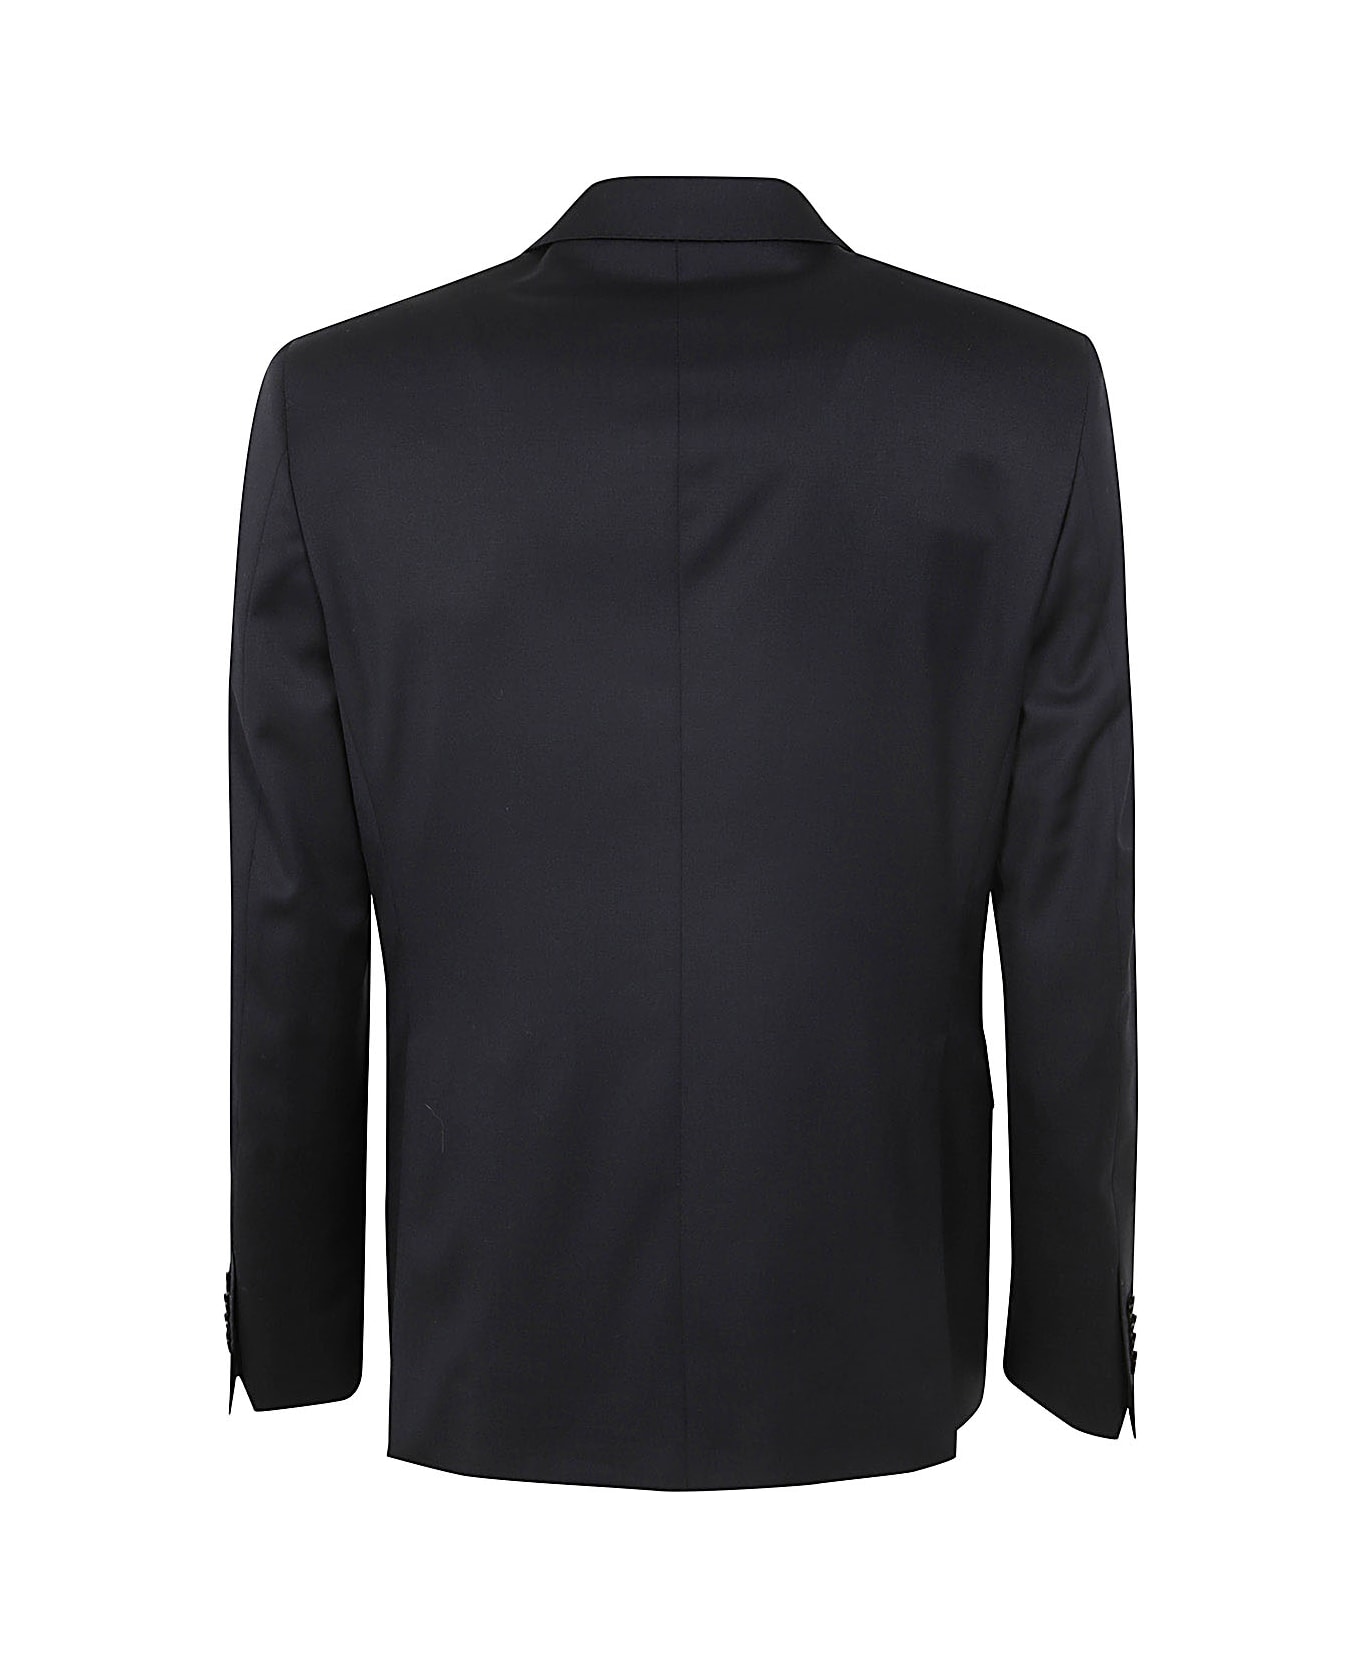 Tagliatore Classic Suit With Constructed Shoulder - Black スーツ